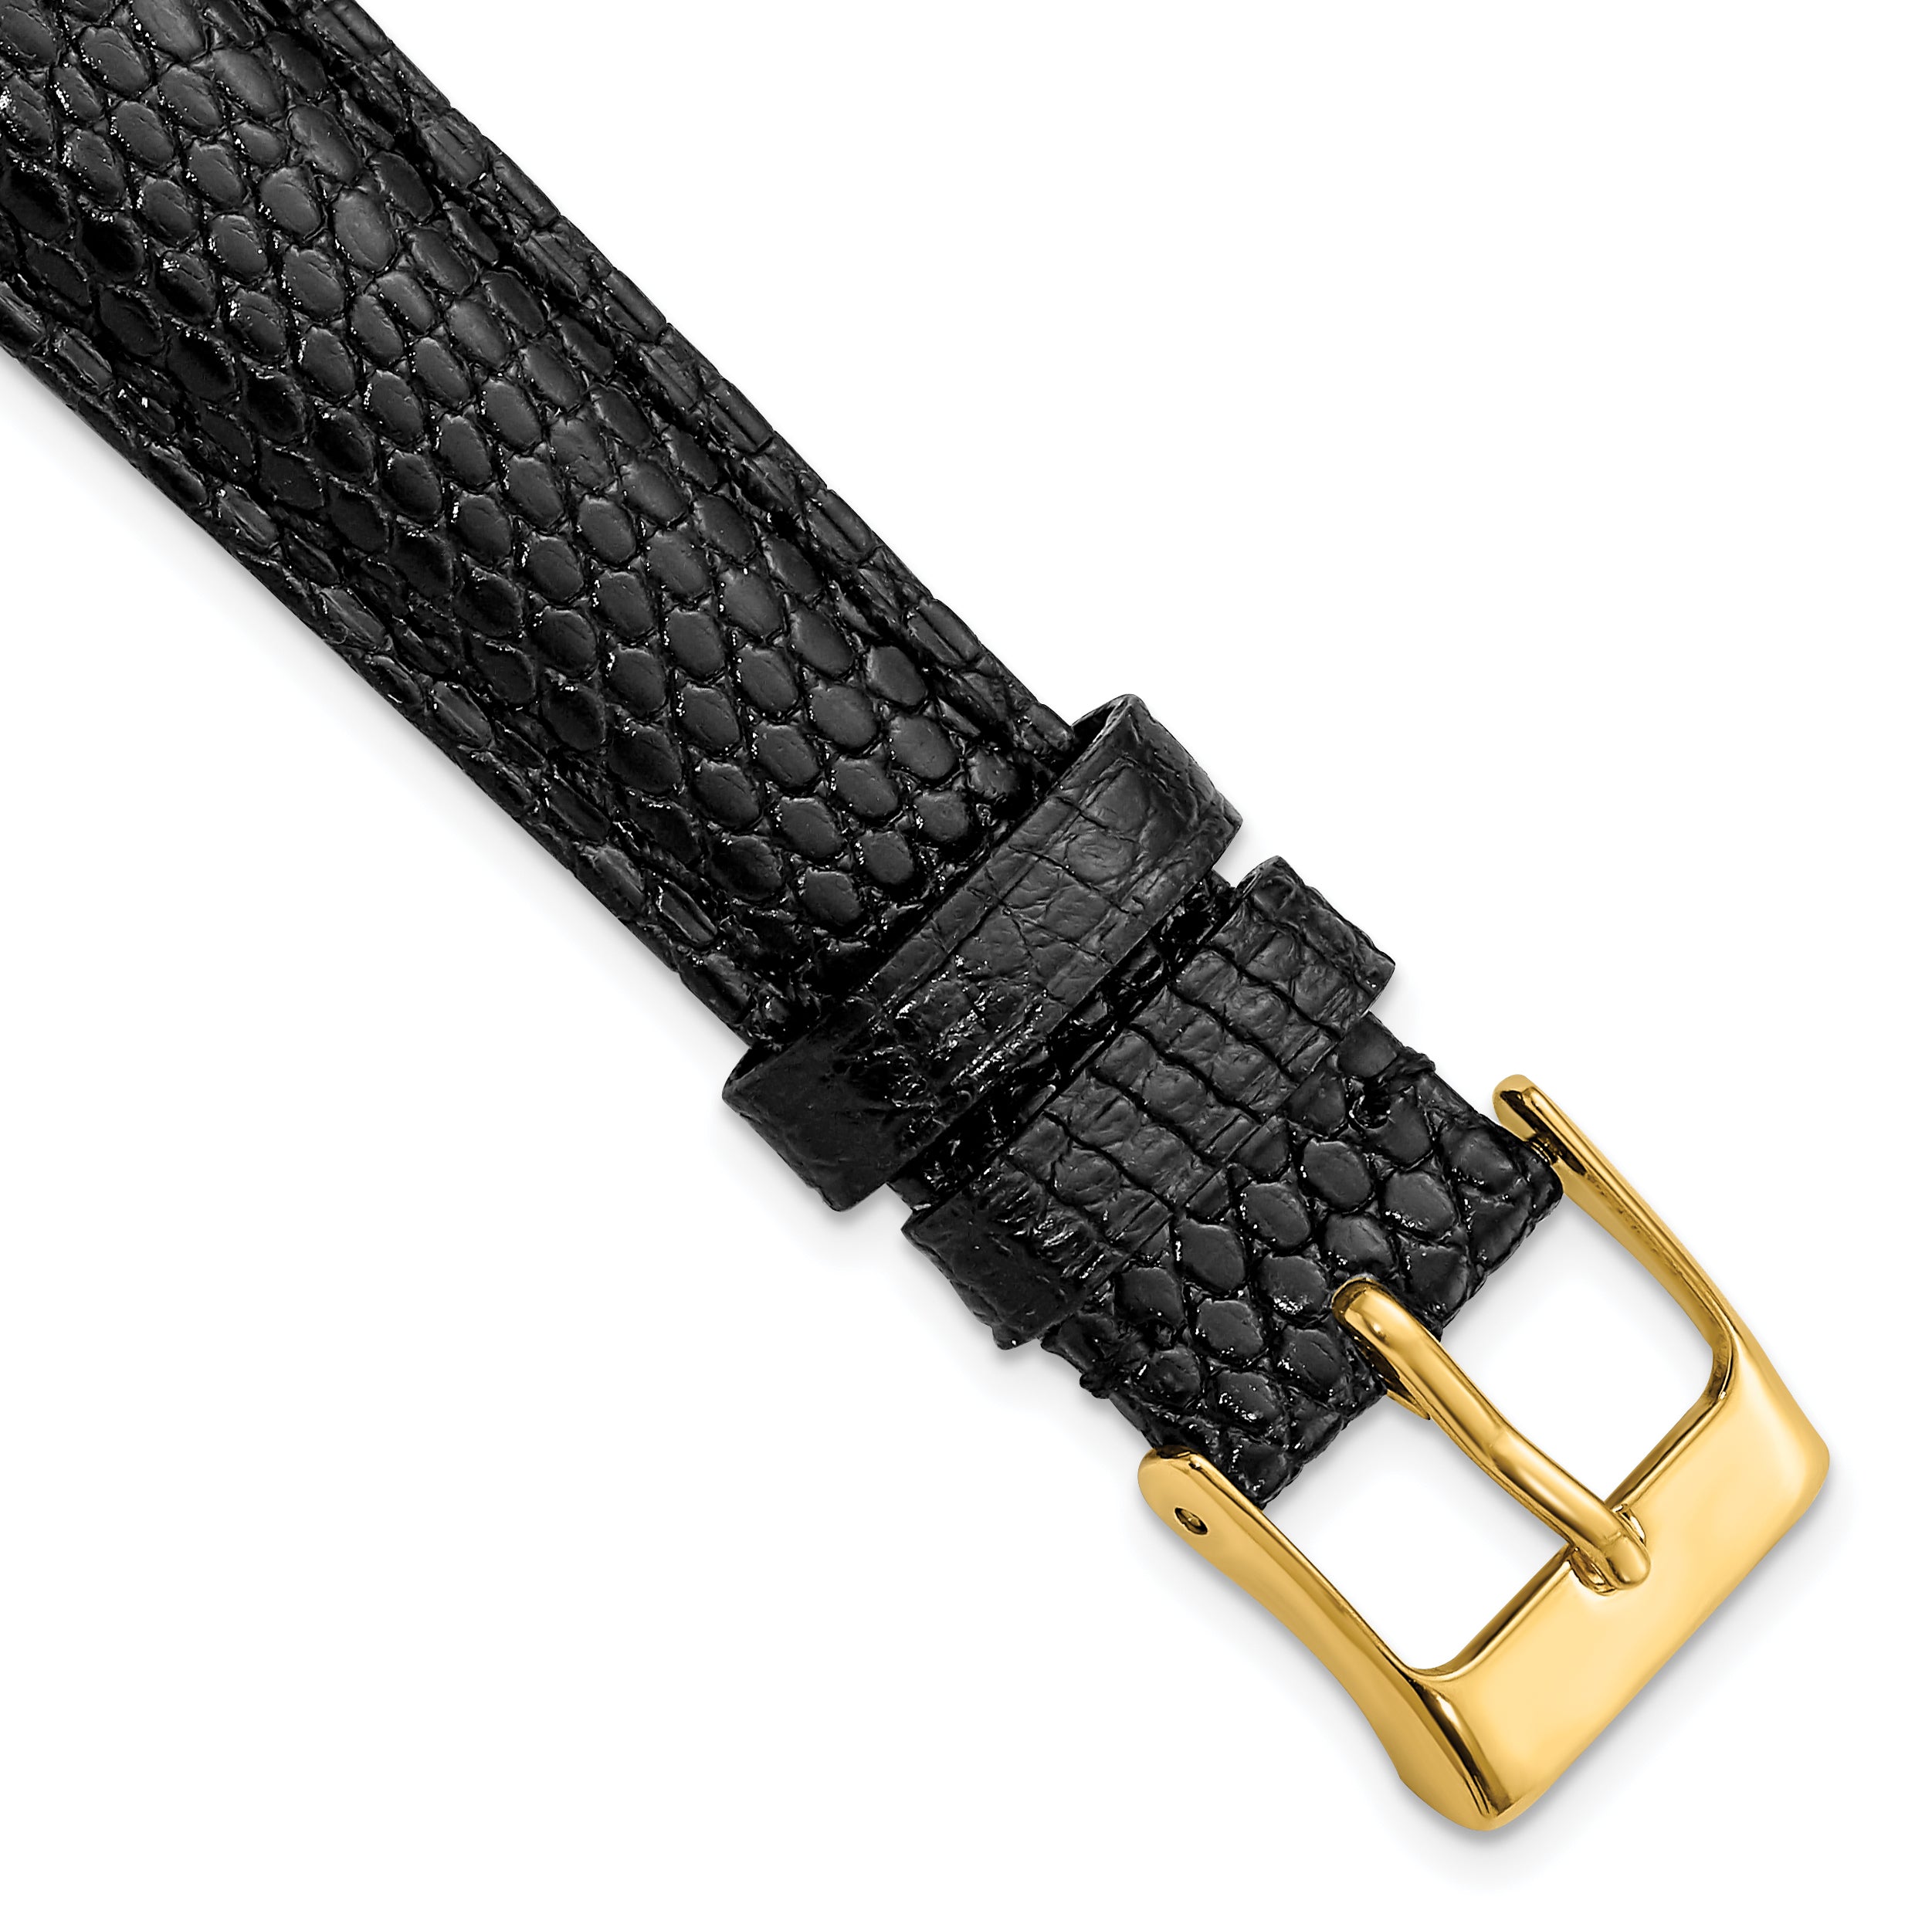 DeBeer 16mm Black Genuine Lizard Leather with Gold-tone Buckle 7.5 inch Watch Band